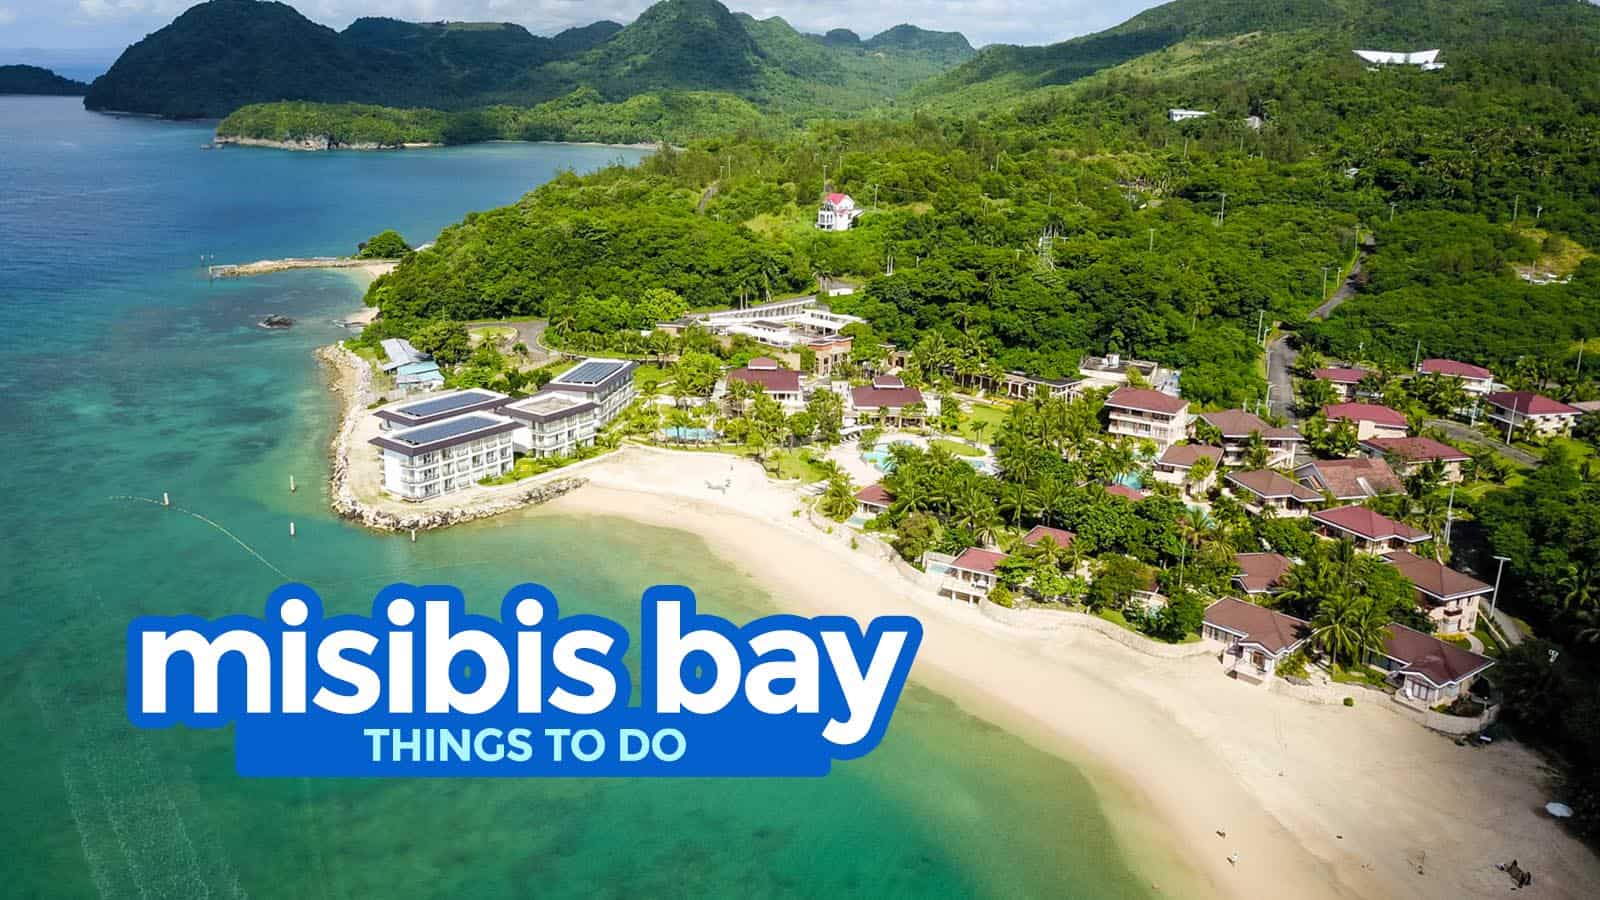 MISIBIS BAY RESORT: Top Things to Do